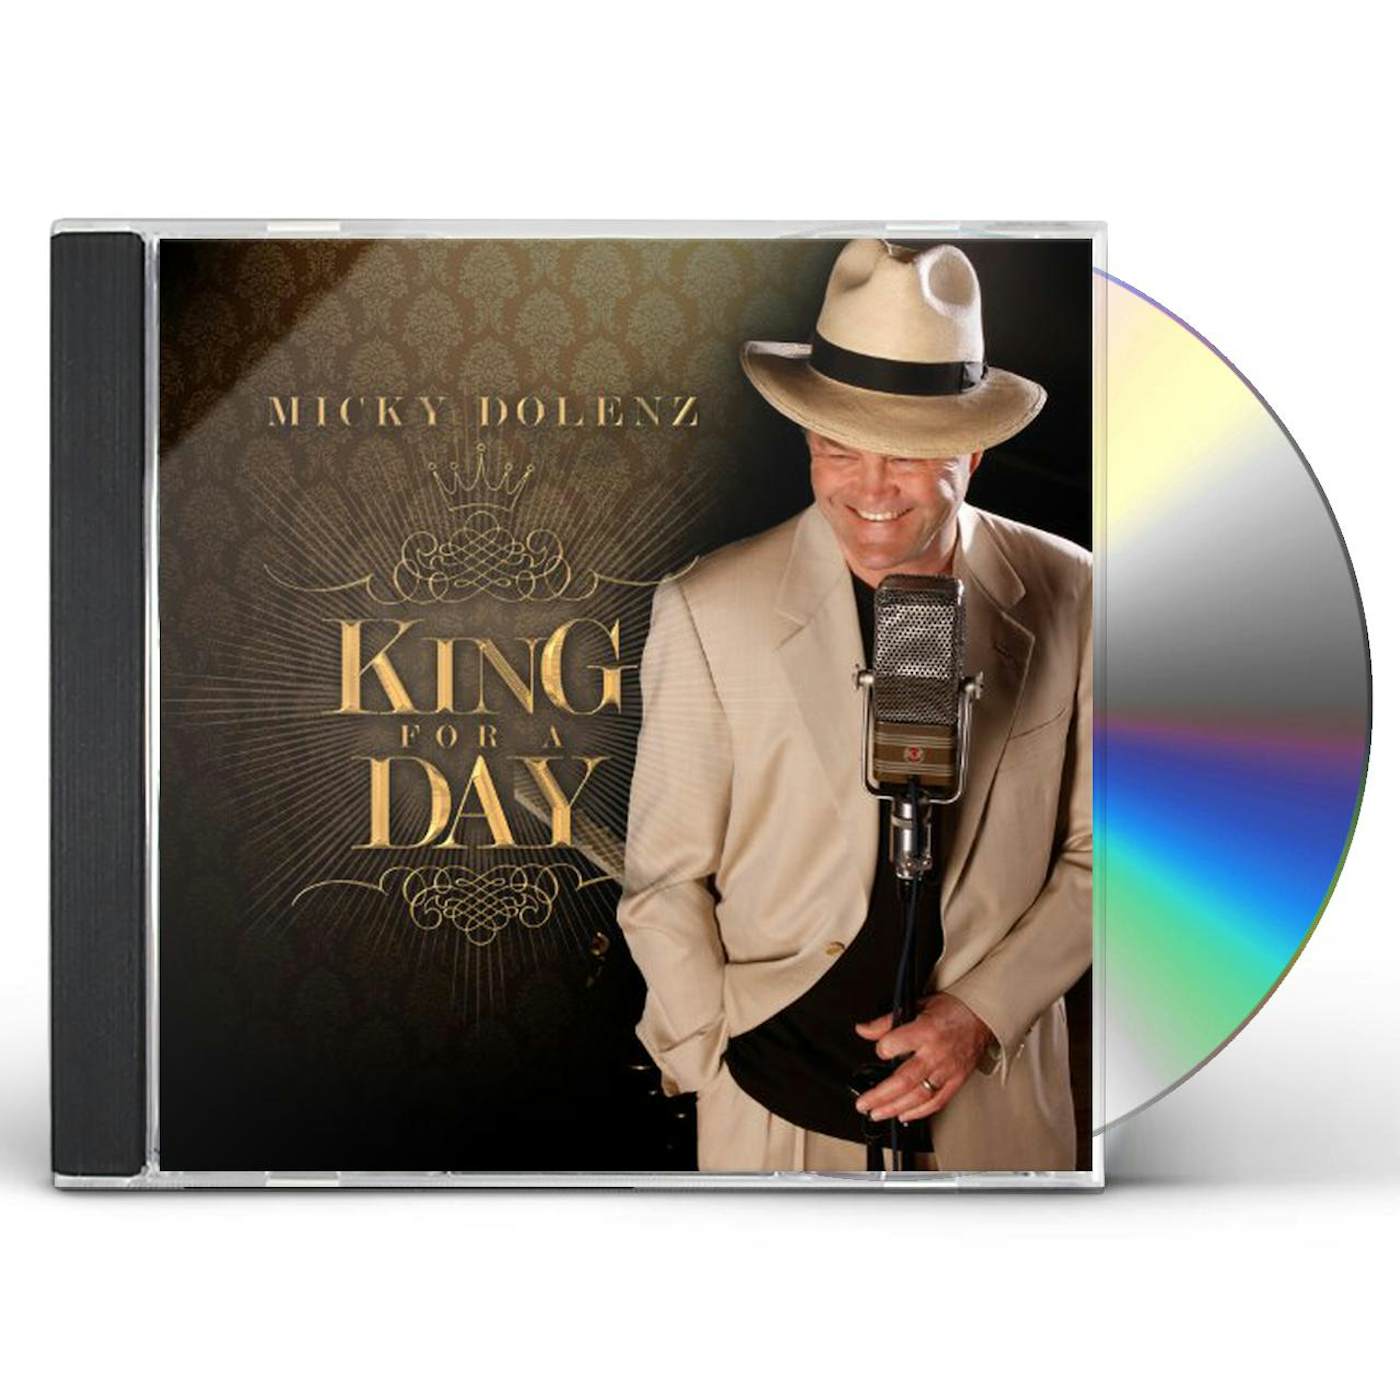 Micky Dolenz KING FOR A DAY CD